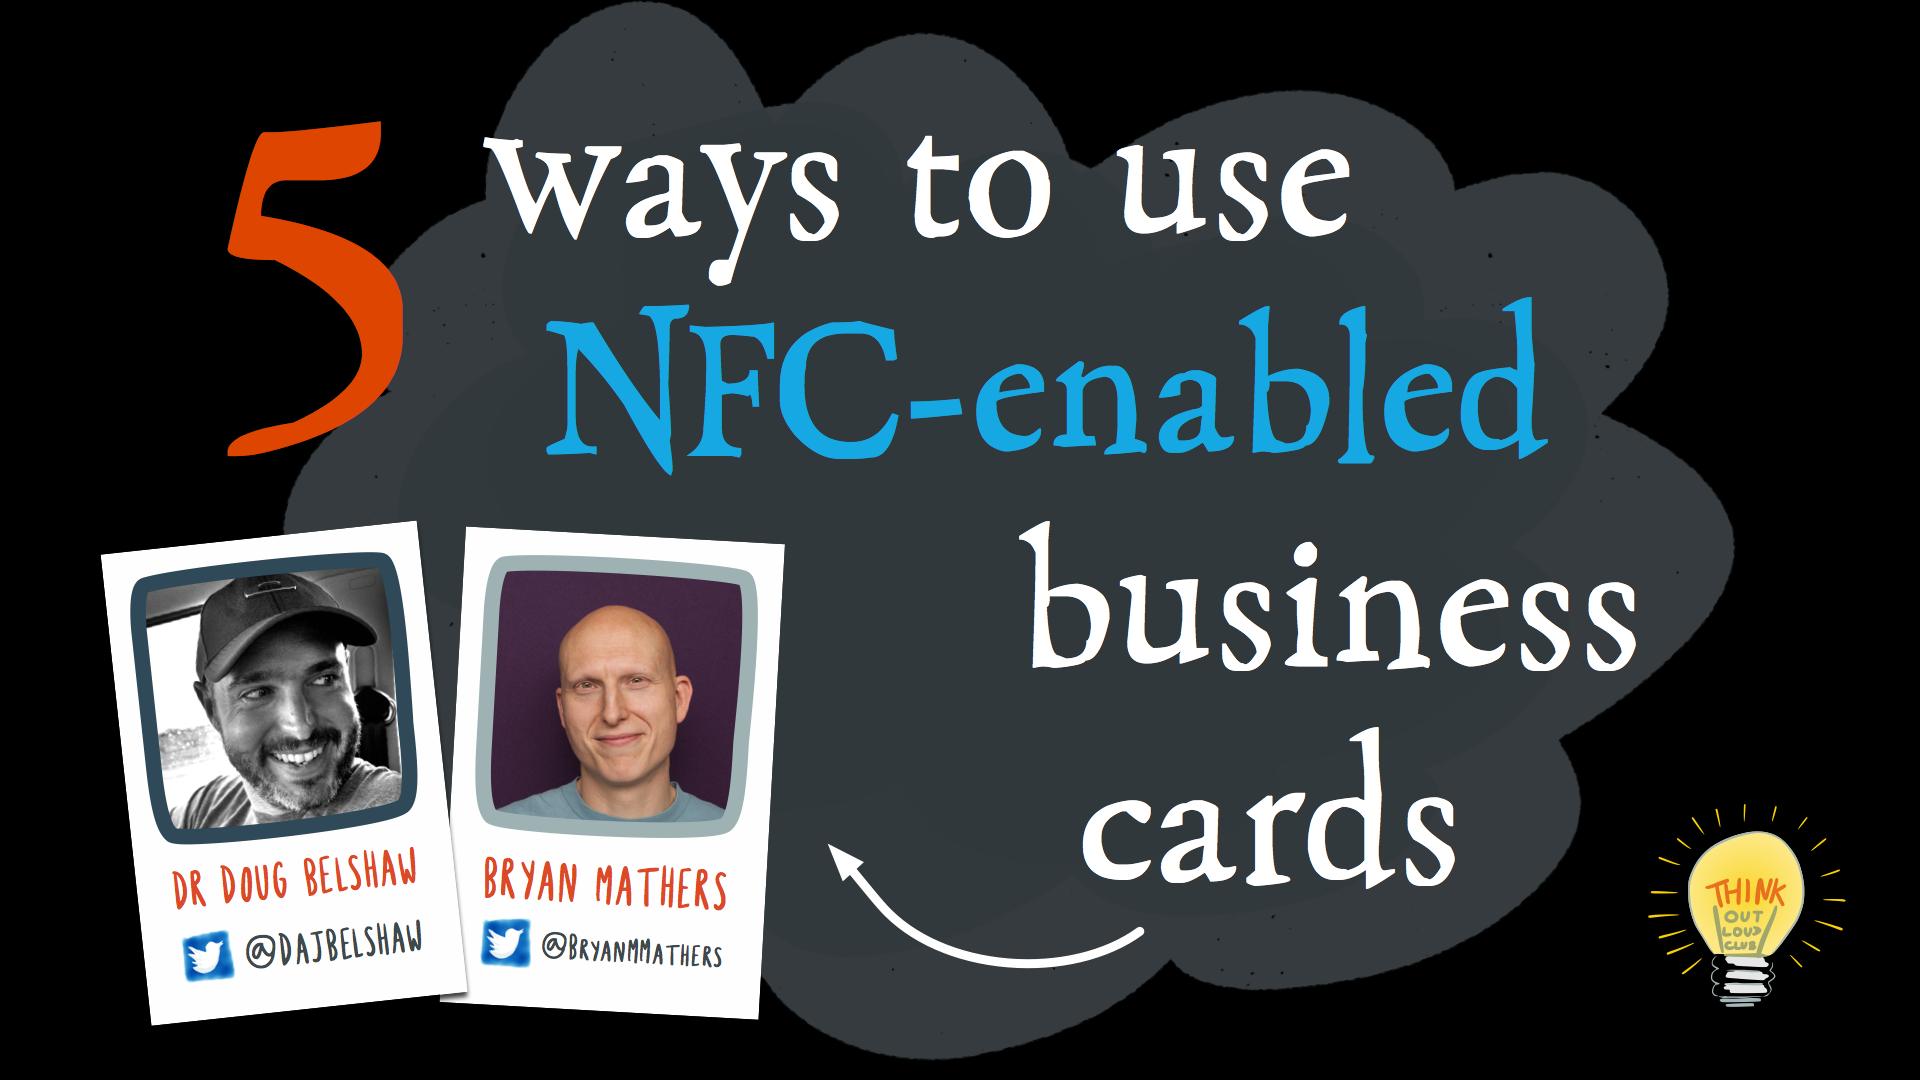 5 ways to use NFC-enabled business cards